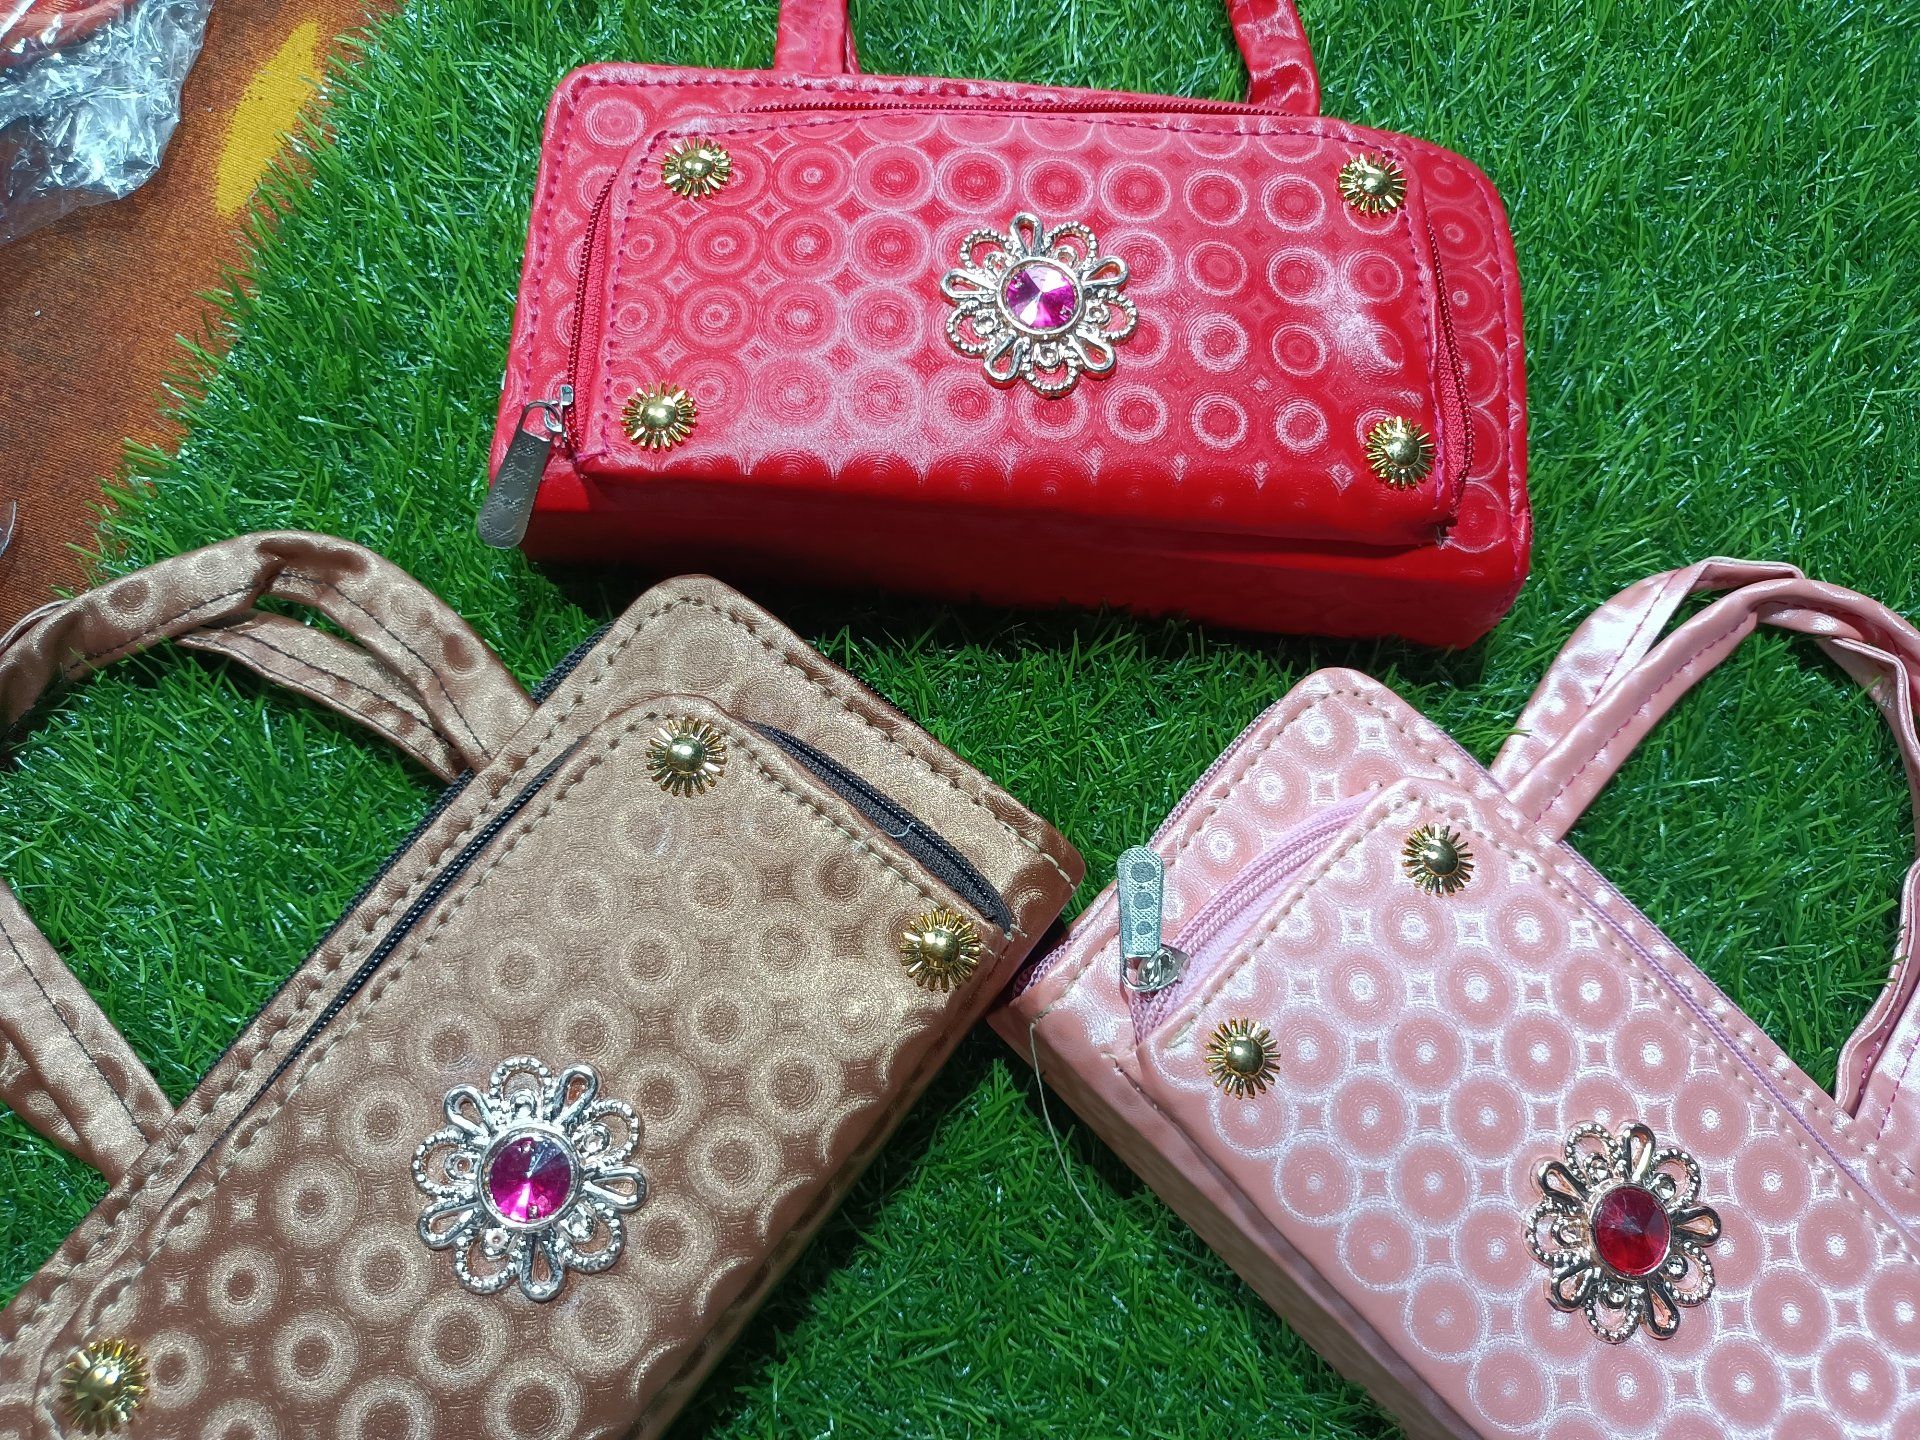 Double A Ladies Purse Shopee in Itwari,Nagpur - Best Bag Dealers in Nagpur  - Justdial